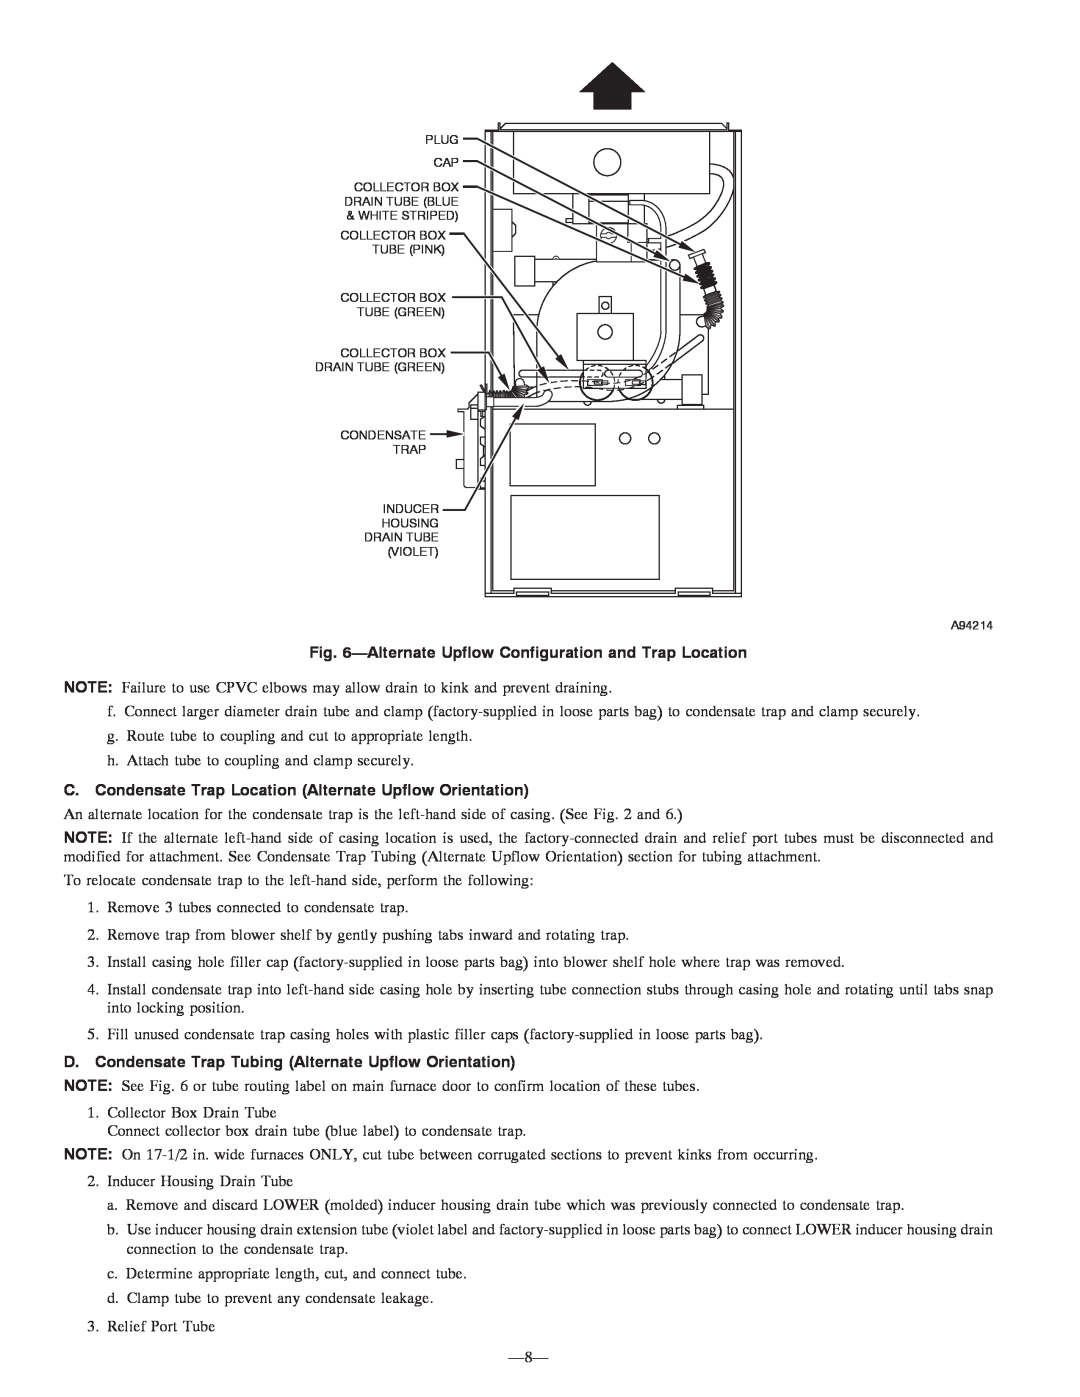 Bryant 355MAV instruction manual h.Attach tube to coupling and clamp securely 